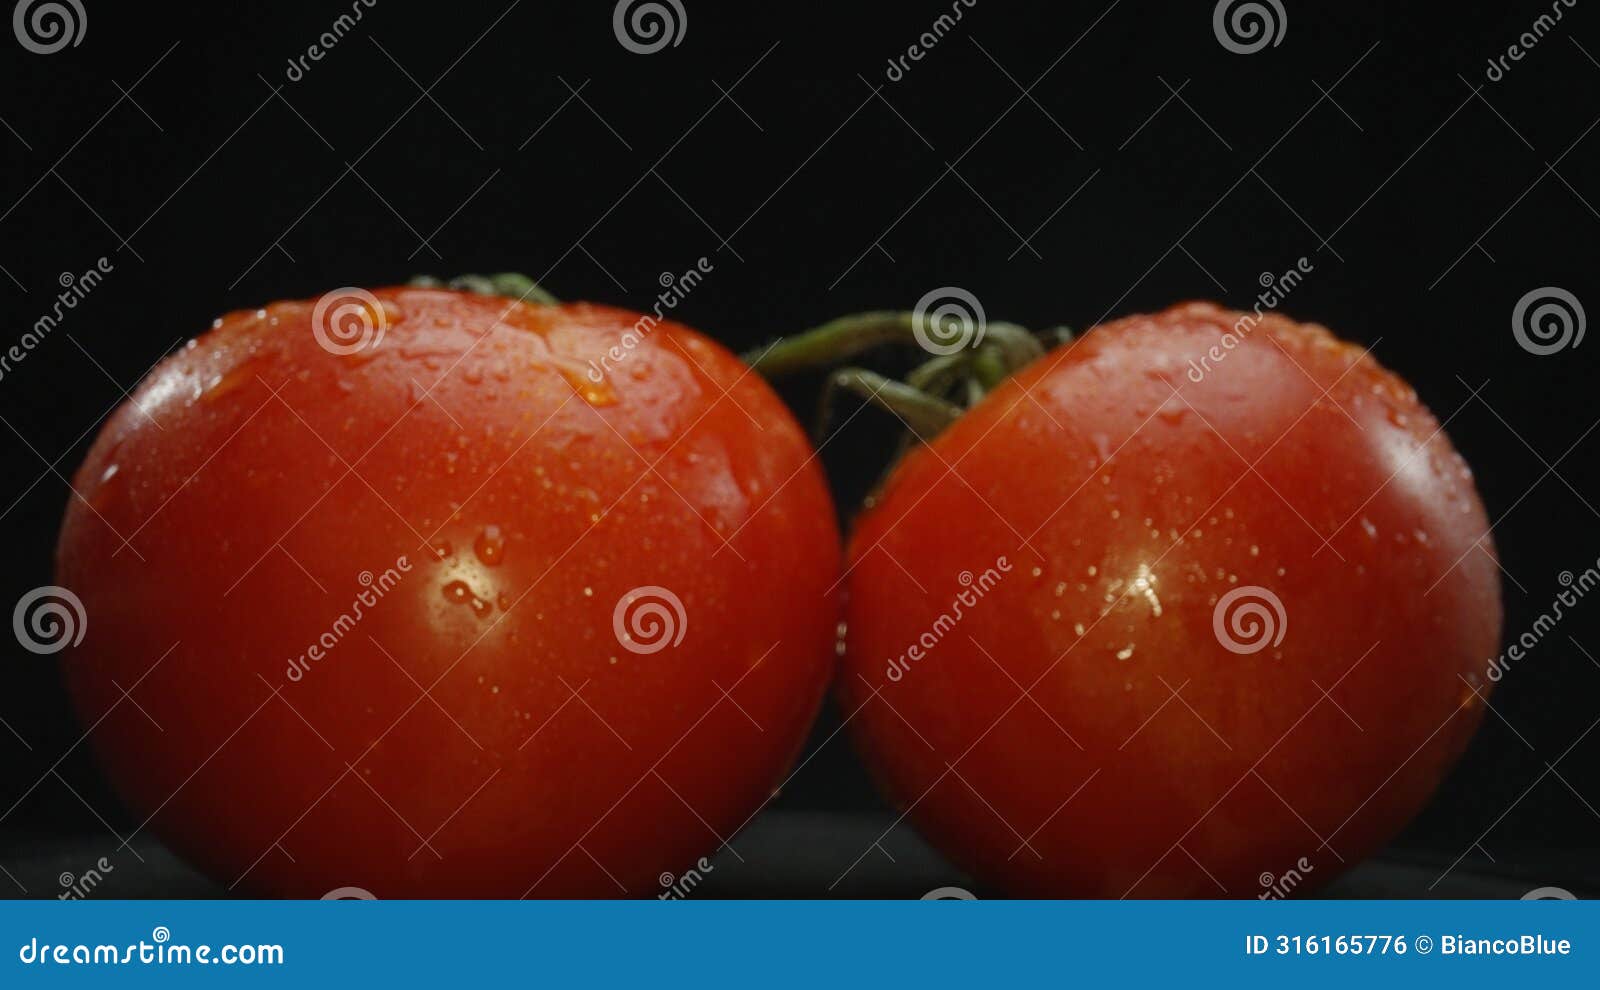 macrography, tomatoes nestled within basket with black background. comestible.